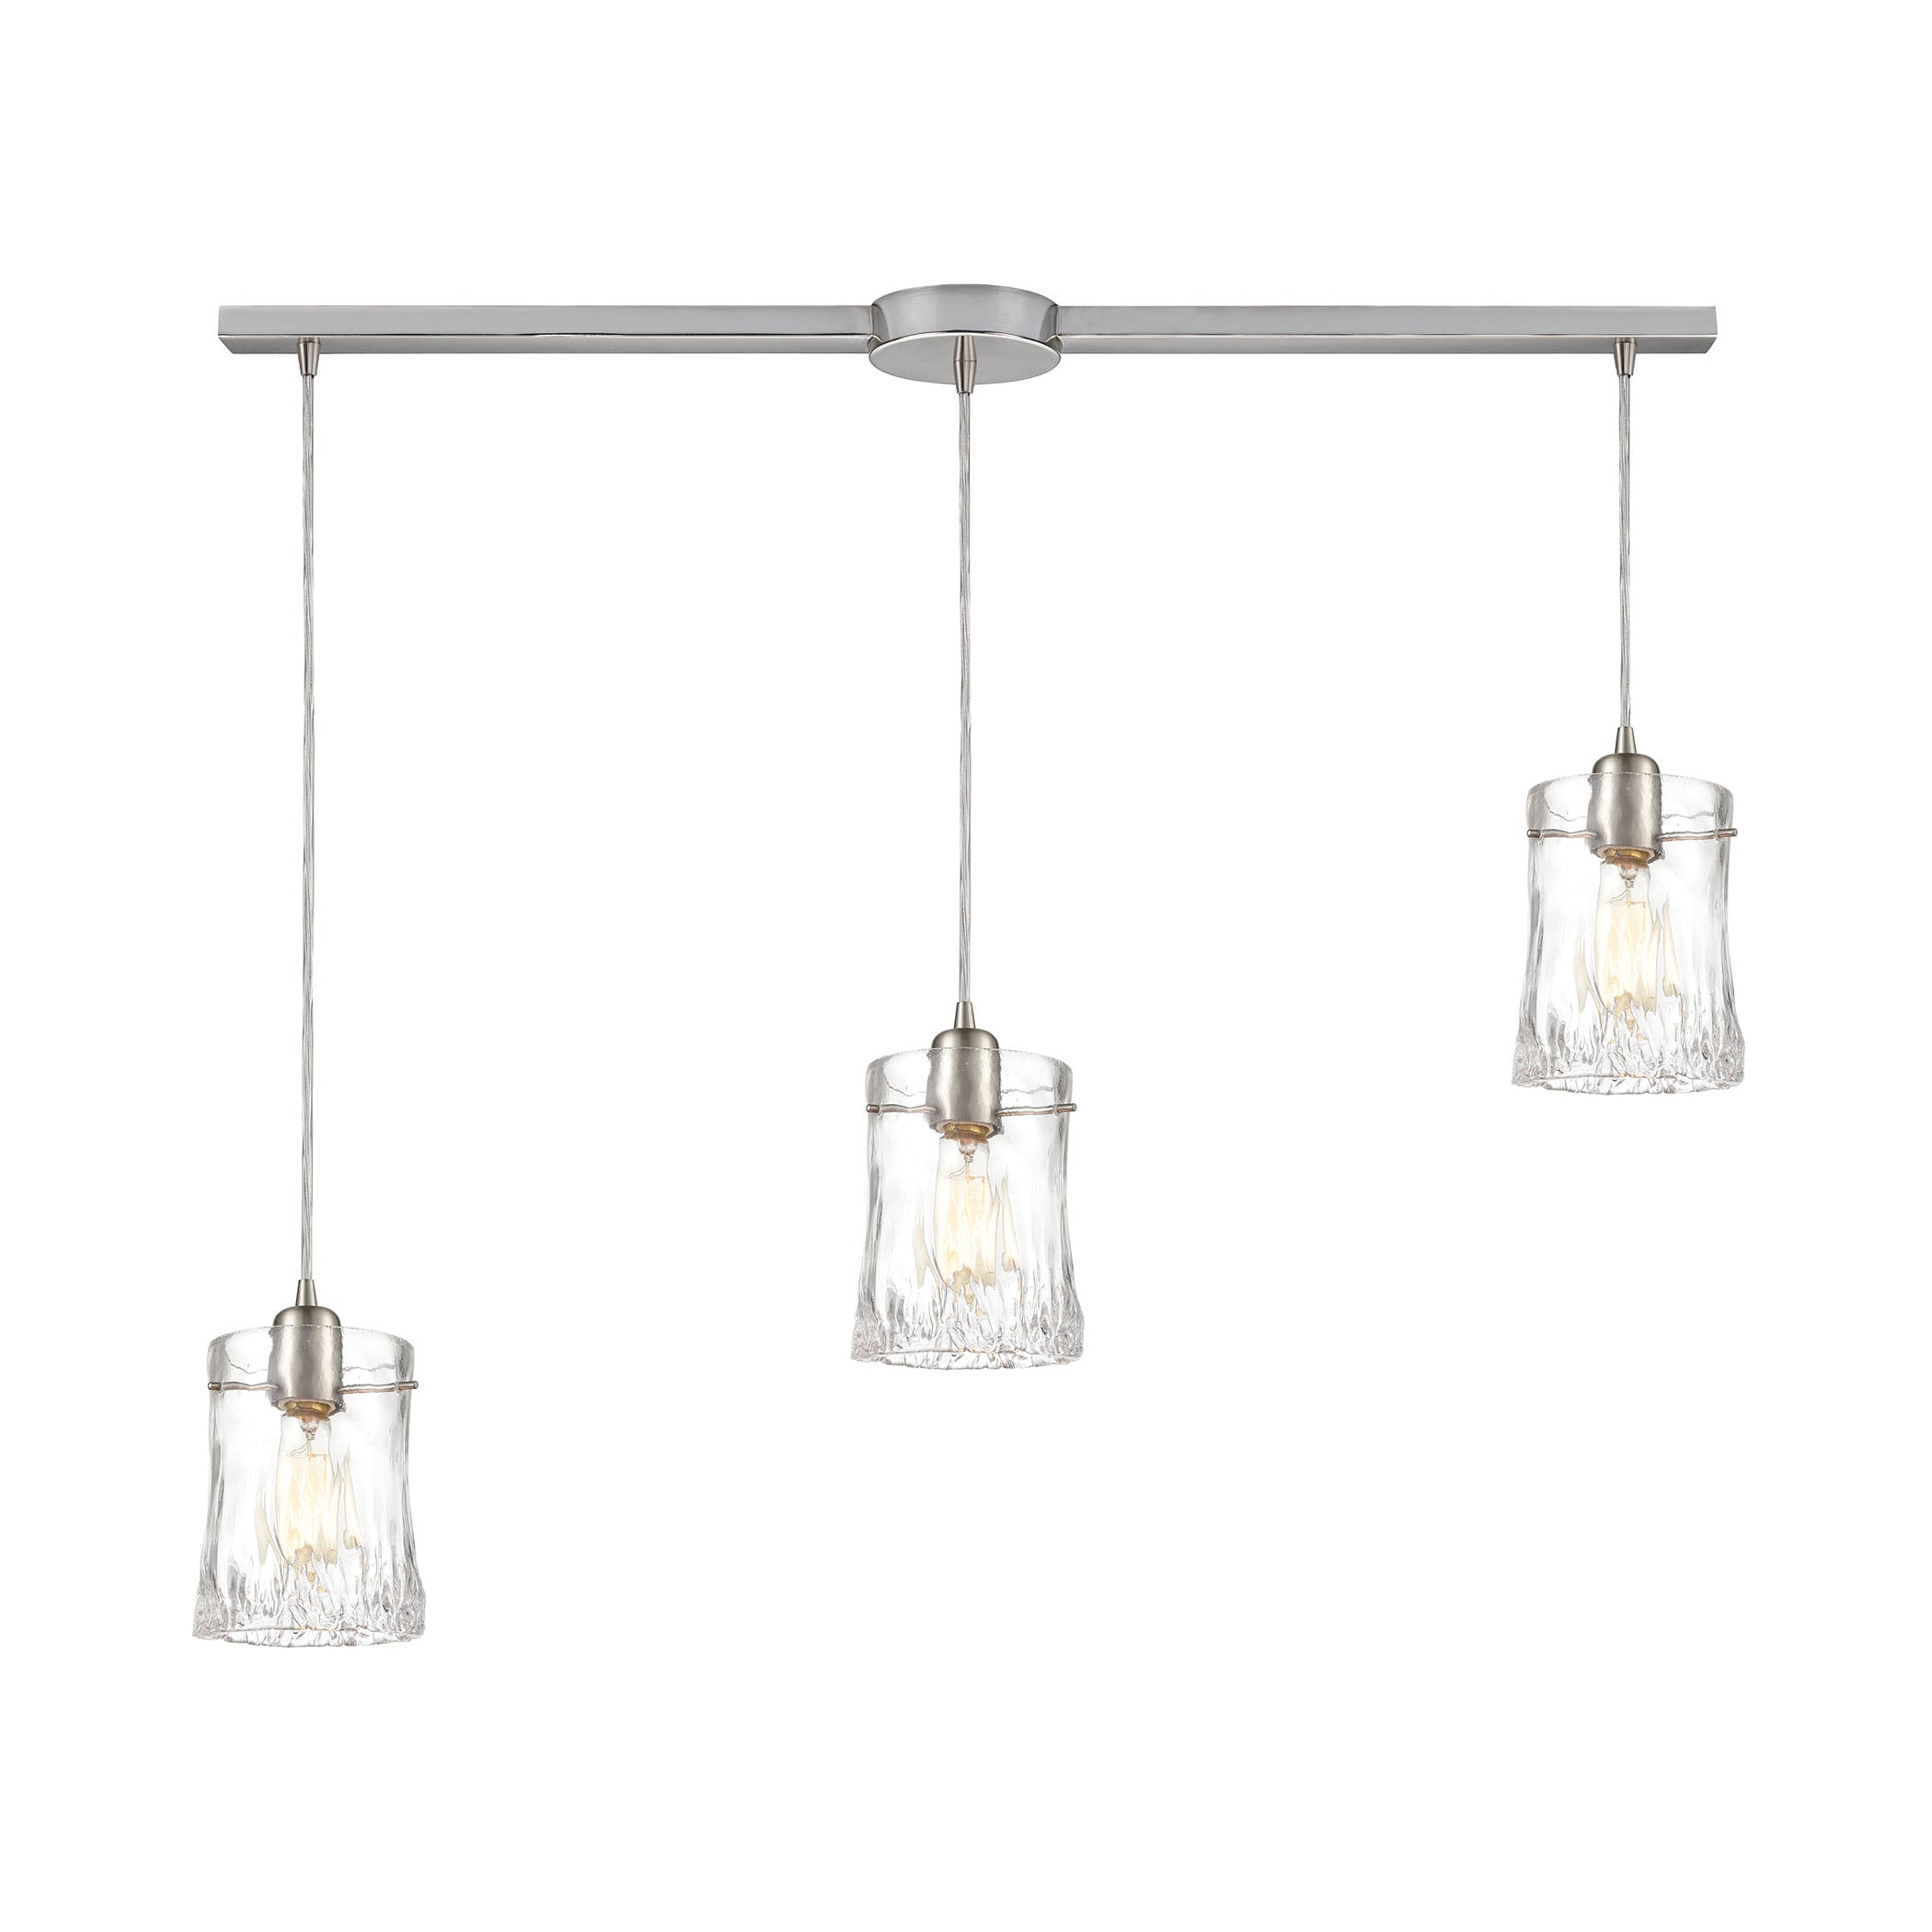 ELK Lighting 21200/3L Hand Formed Glass 3-Light Linear Mini Pendant Fixture in Satin Nickel with Clear Hand-formed Glass